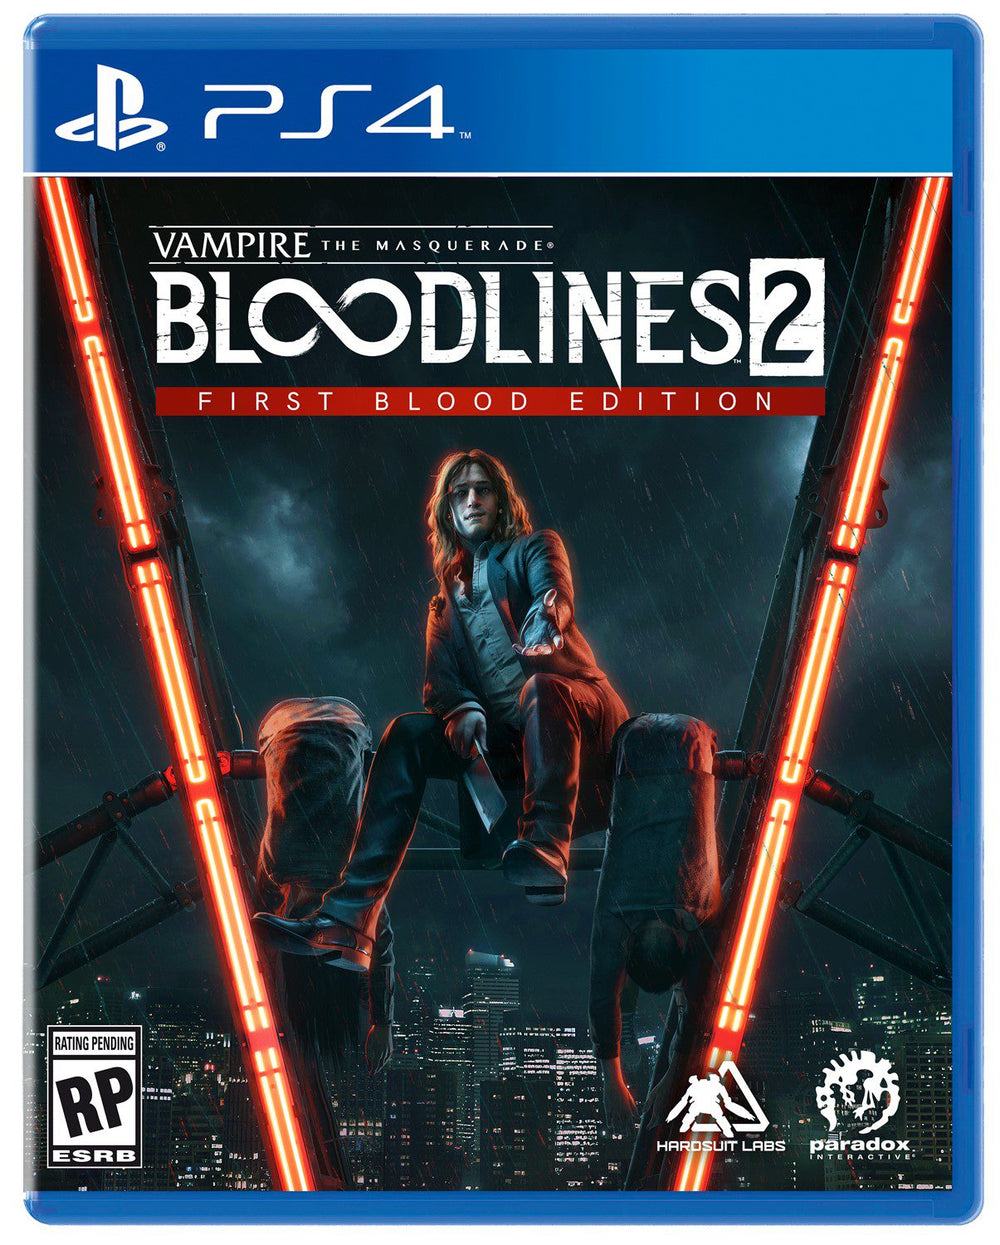 Vampire: The Masquerade - Bloodlines 2 (First Blood Edition) [PS4]